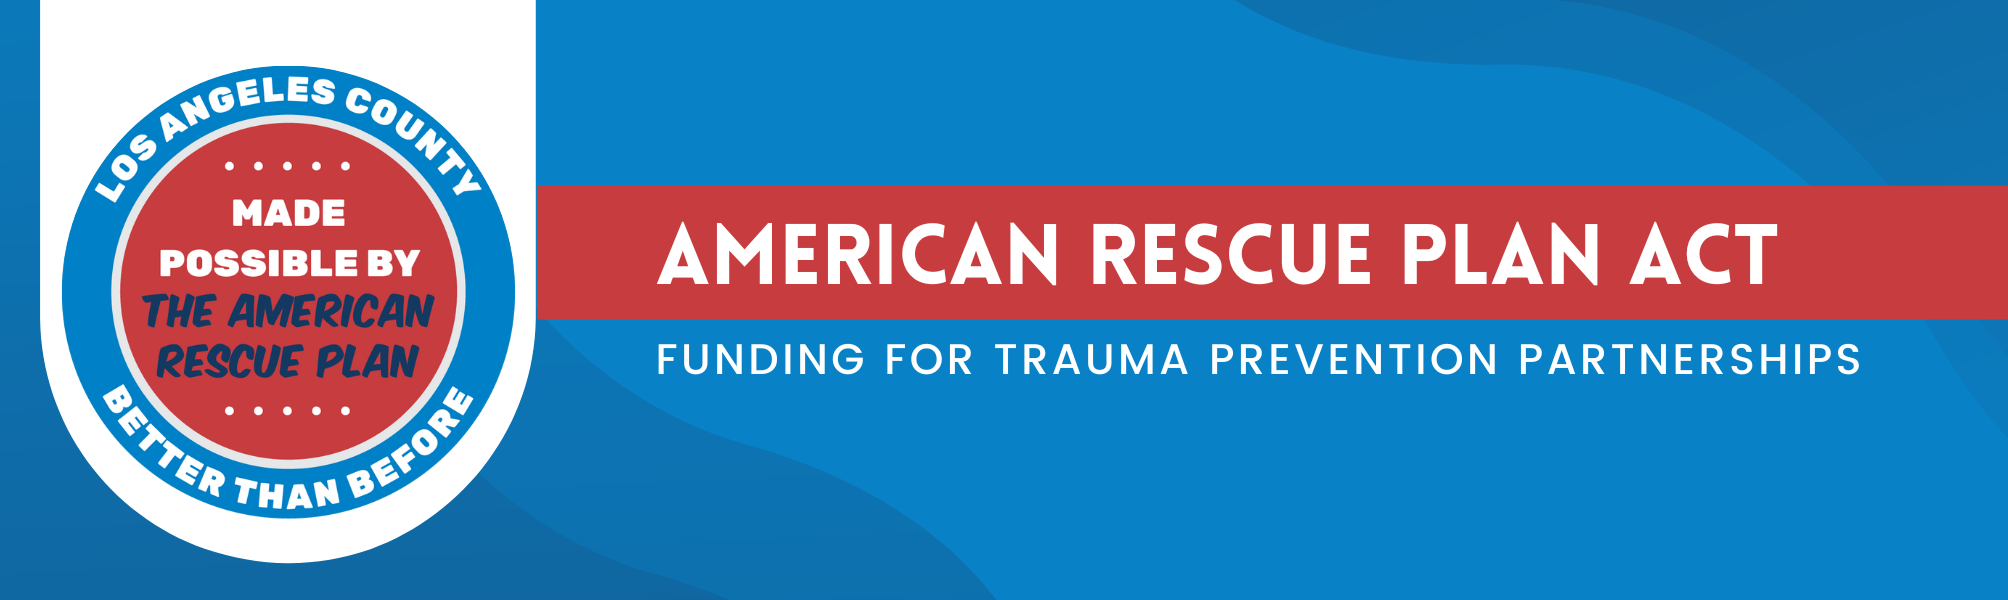 American Rescue Plan Act Banner